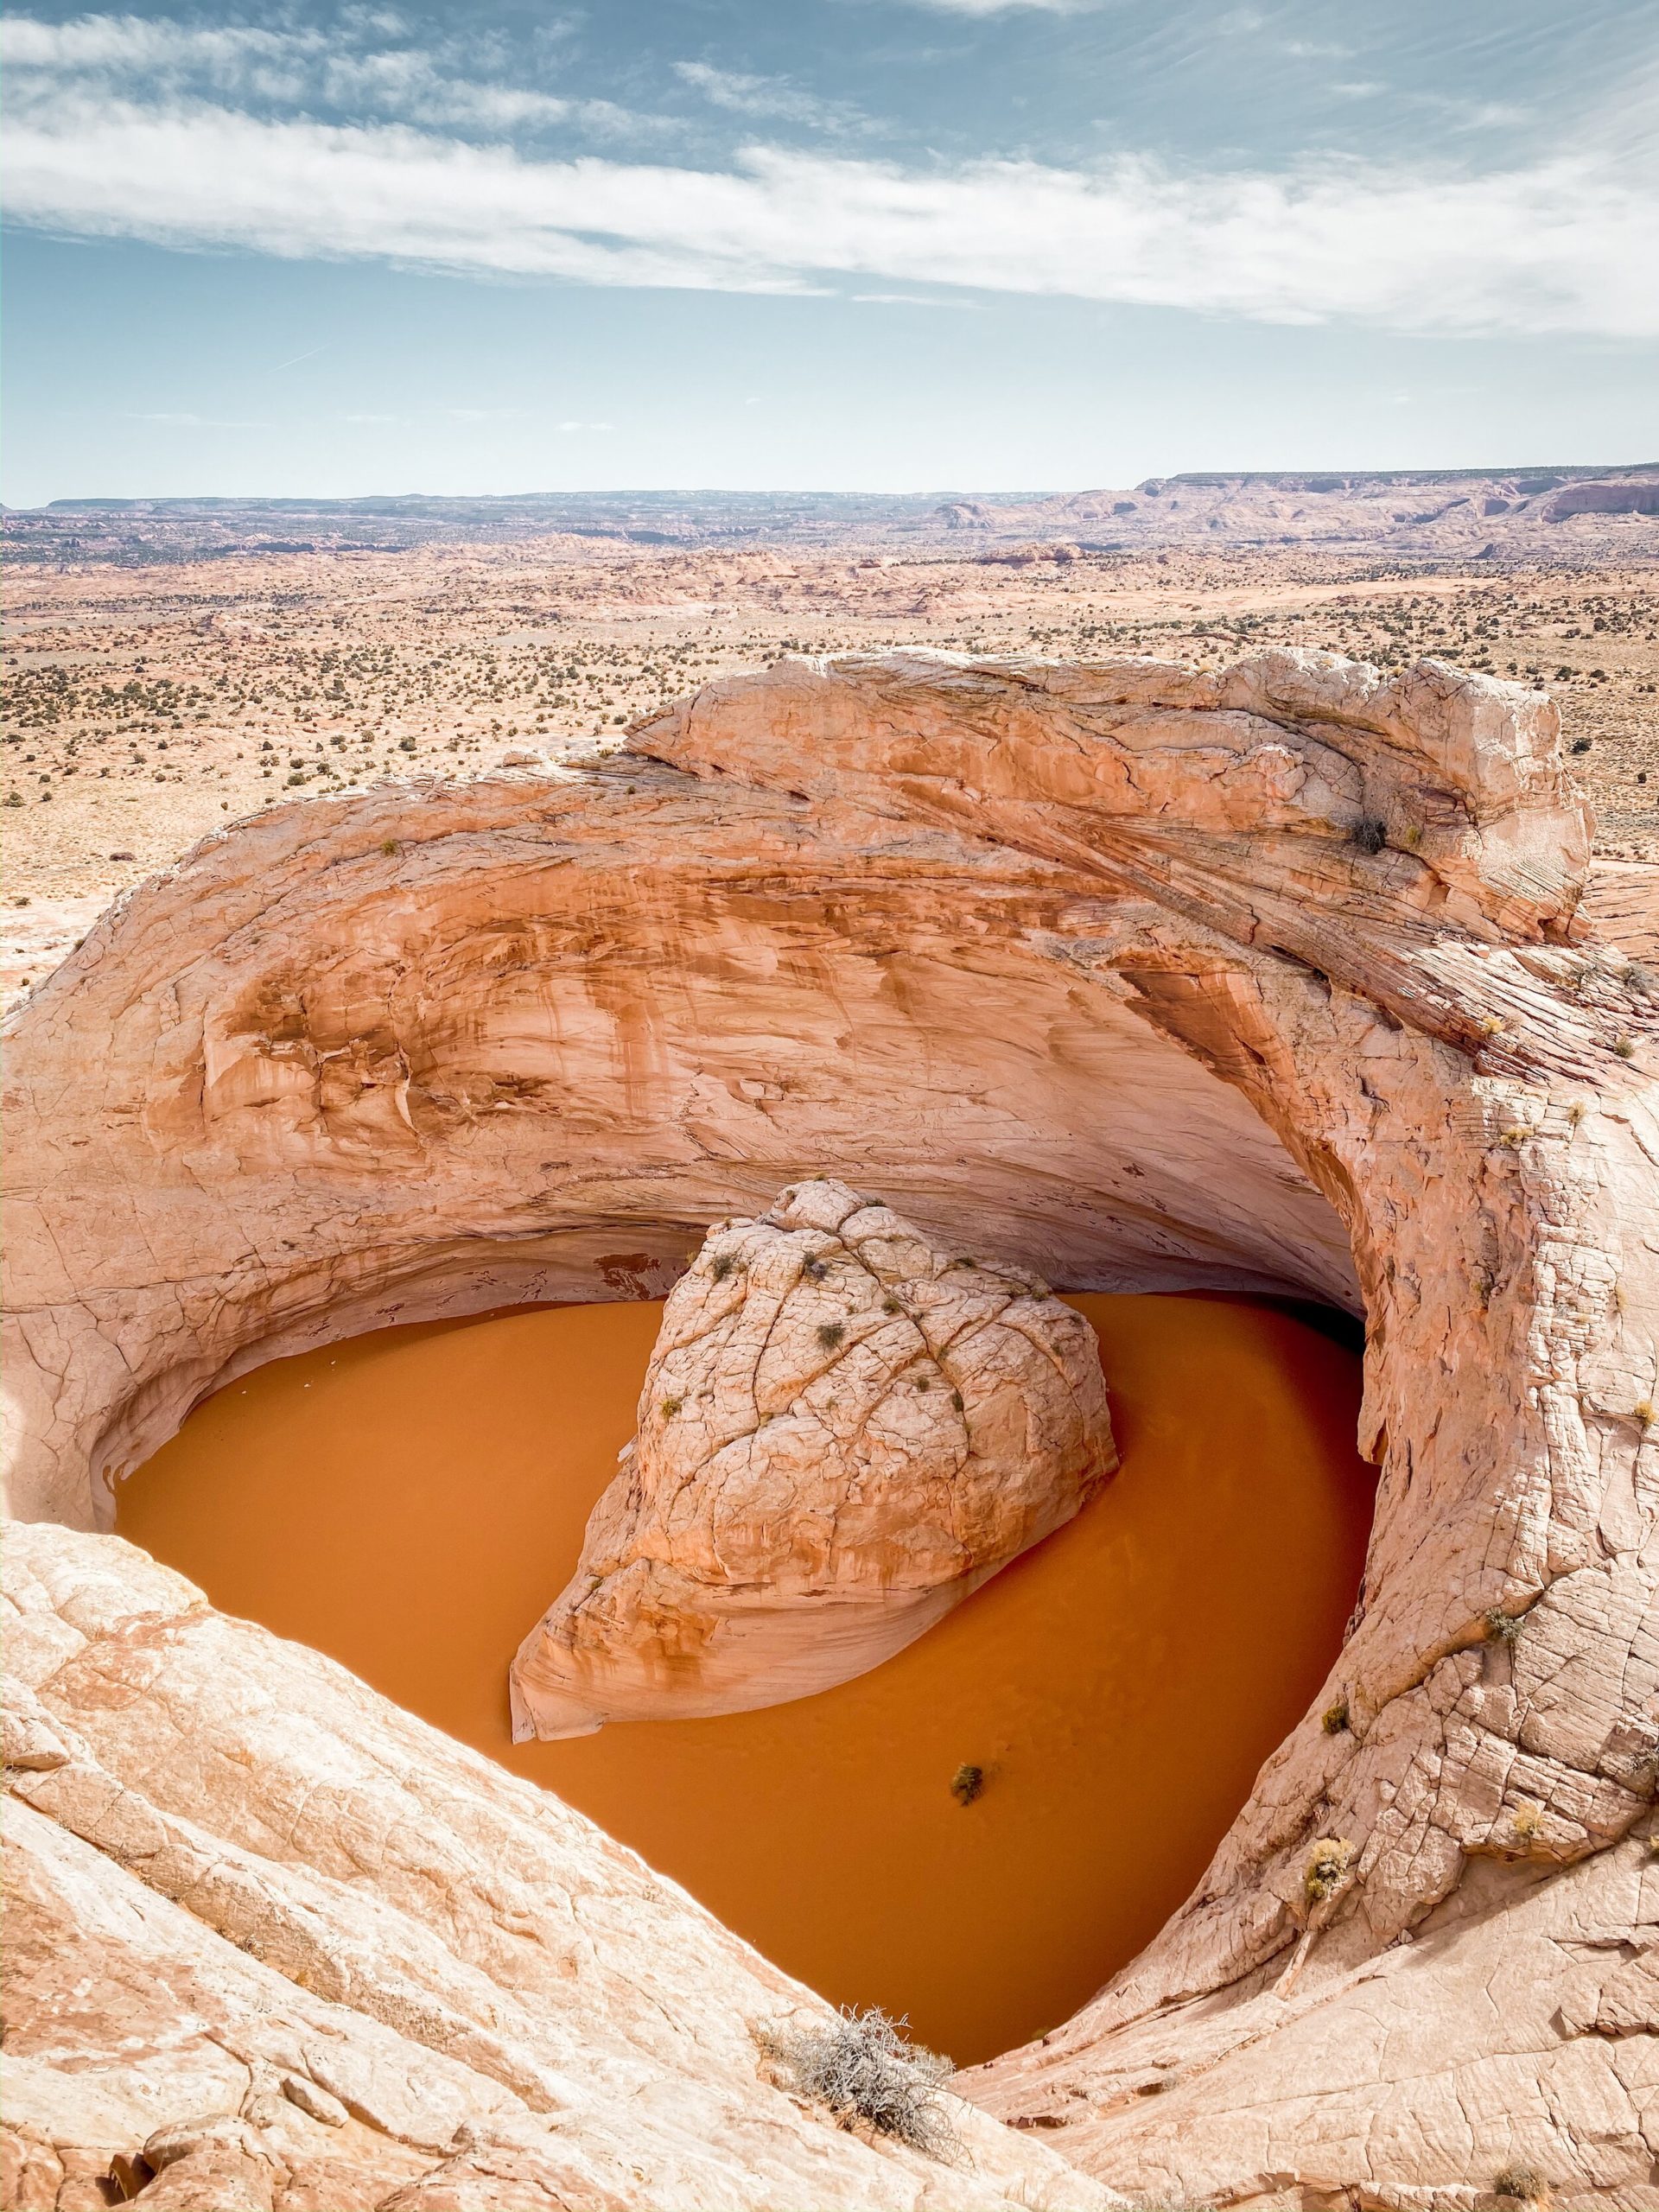 The Cosmic Ashtray in Grand Staircase Escalante National Monument, Utah